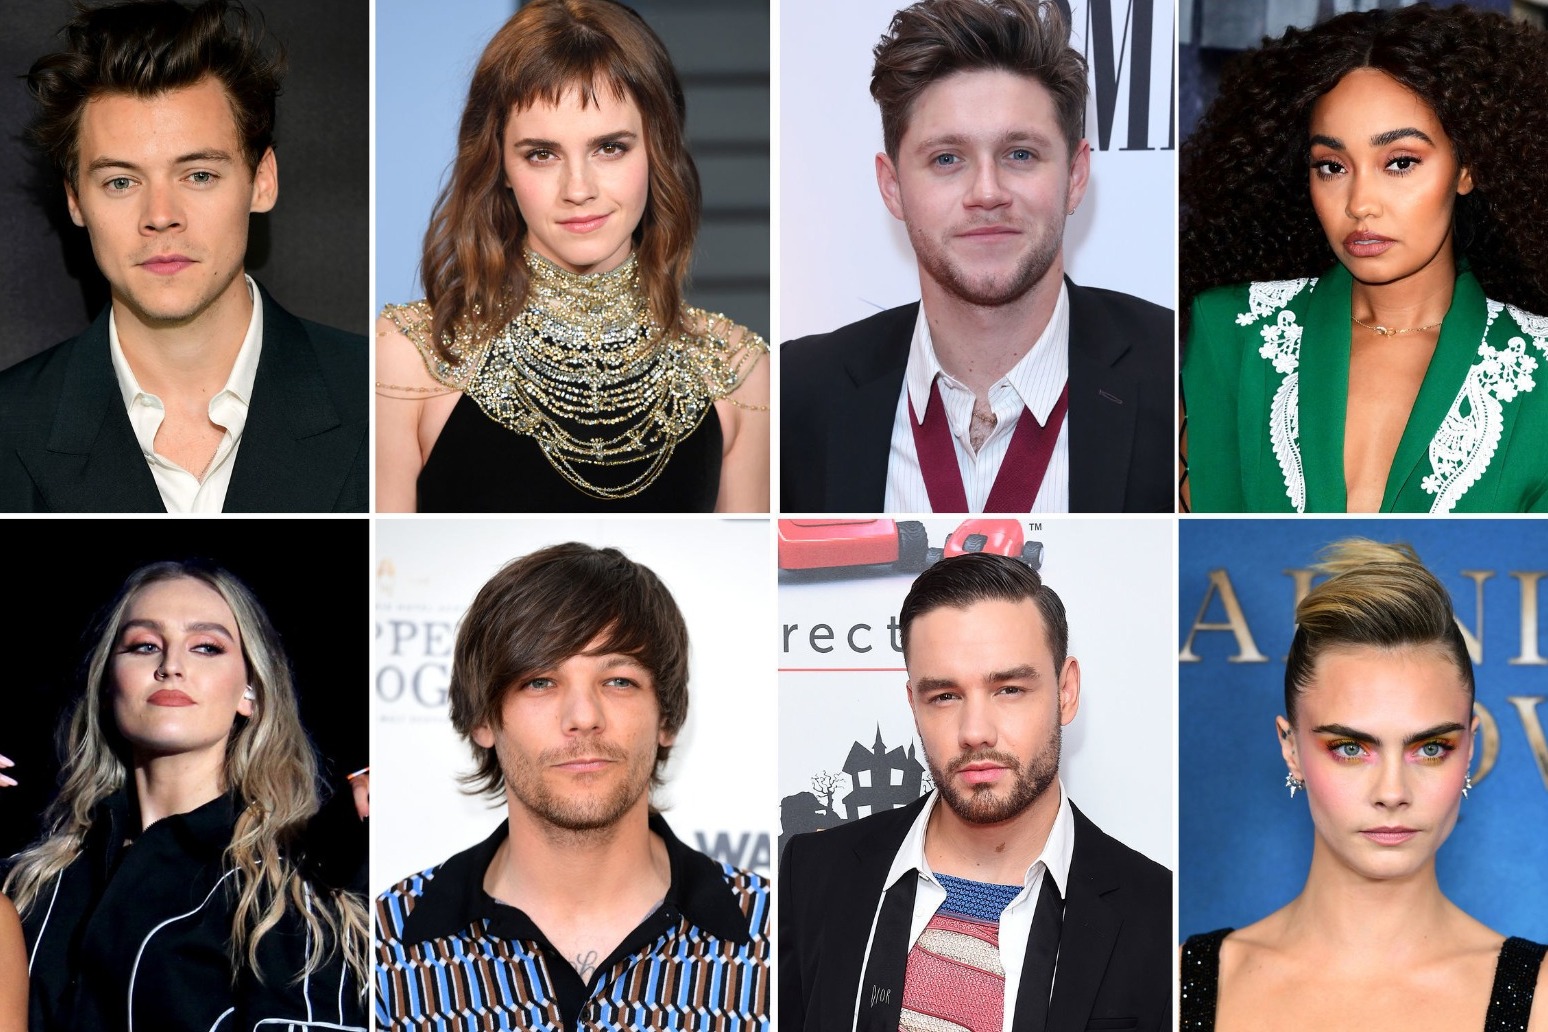 WHO IS THE RICHEST BRITISH CELEBRITY AGED 30 AND UNDER? 